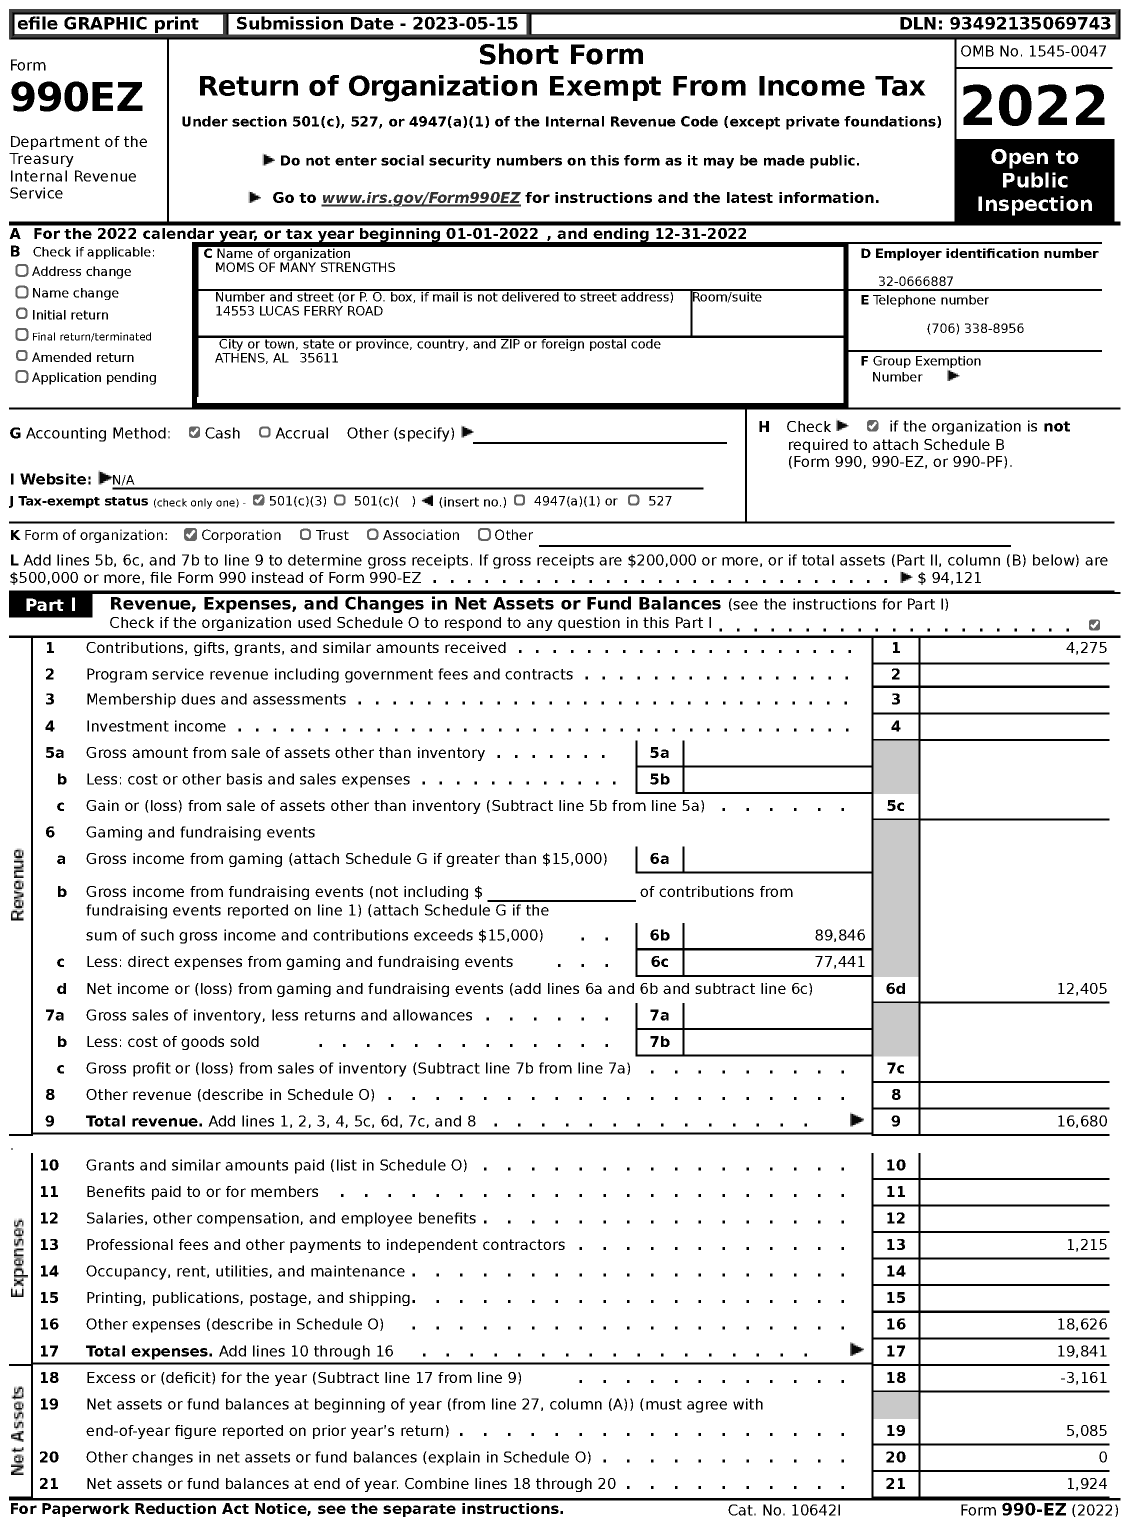 Image of first page of 2022 Form 990EZ for Moms of Many Strengths